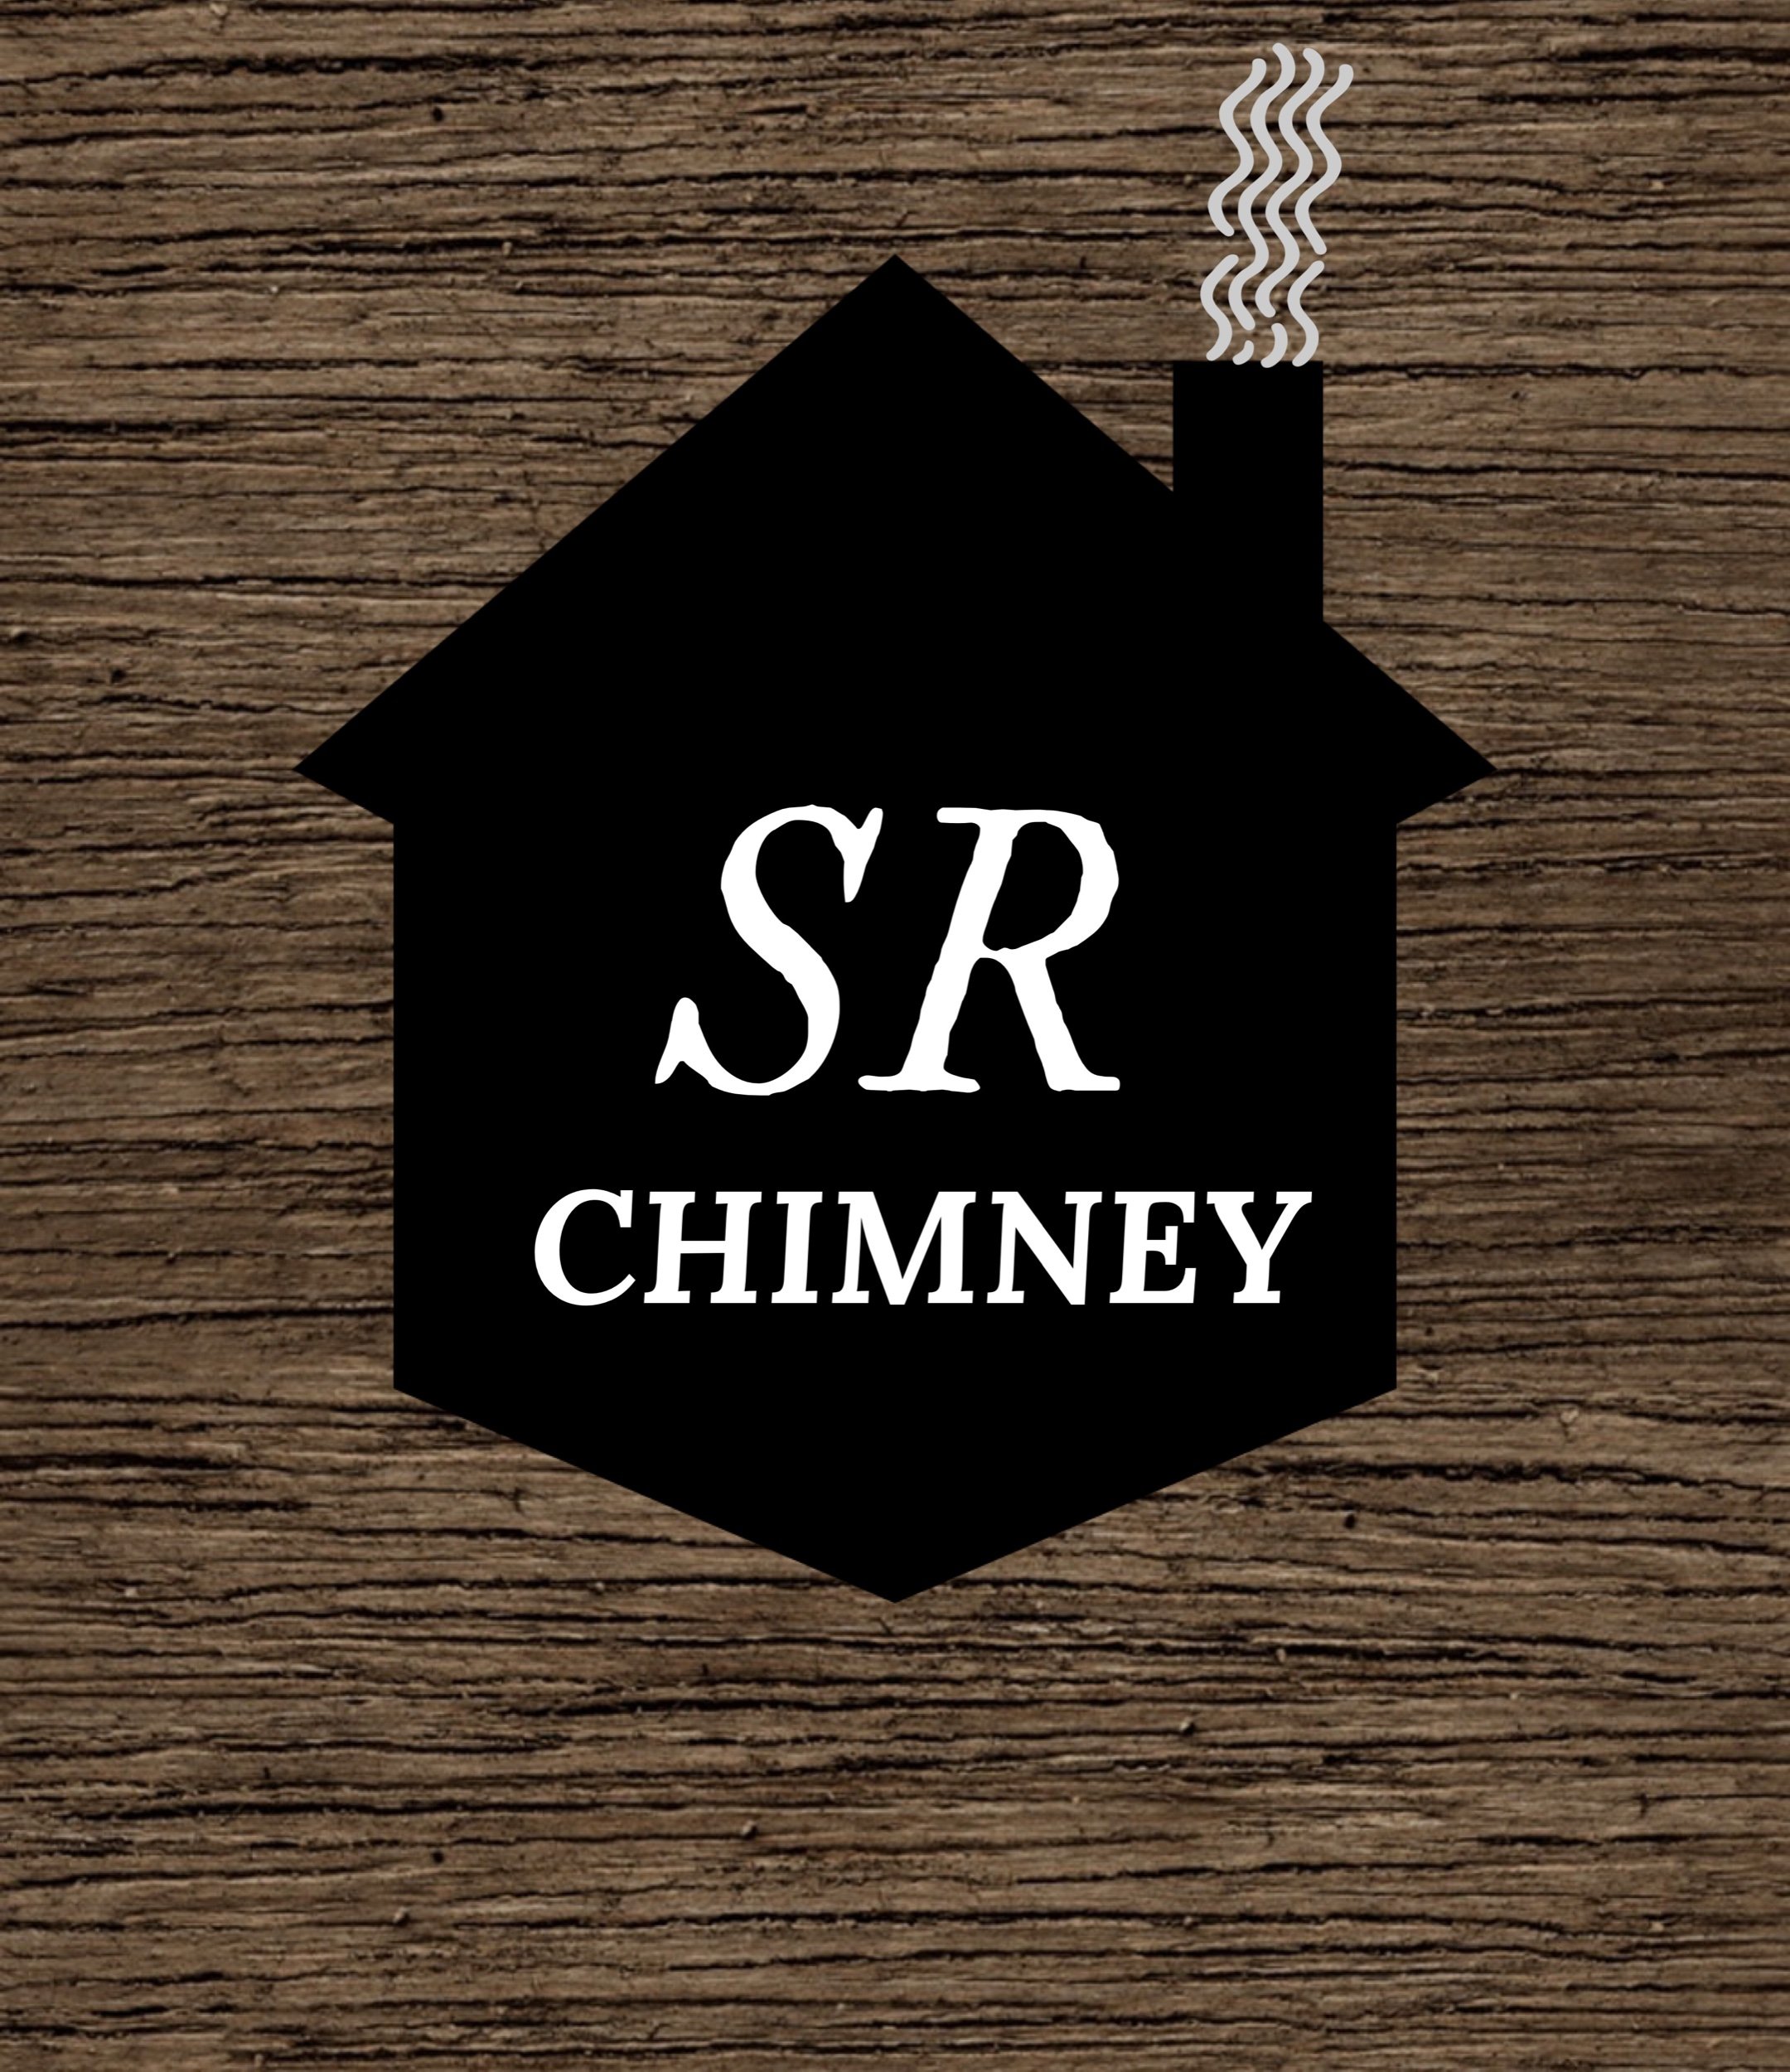 S.R. CHIMNEY and Fireplace